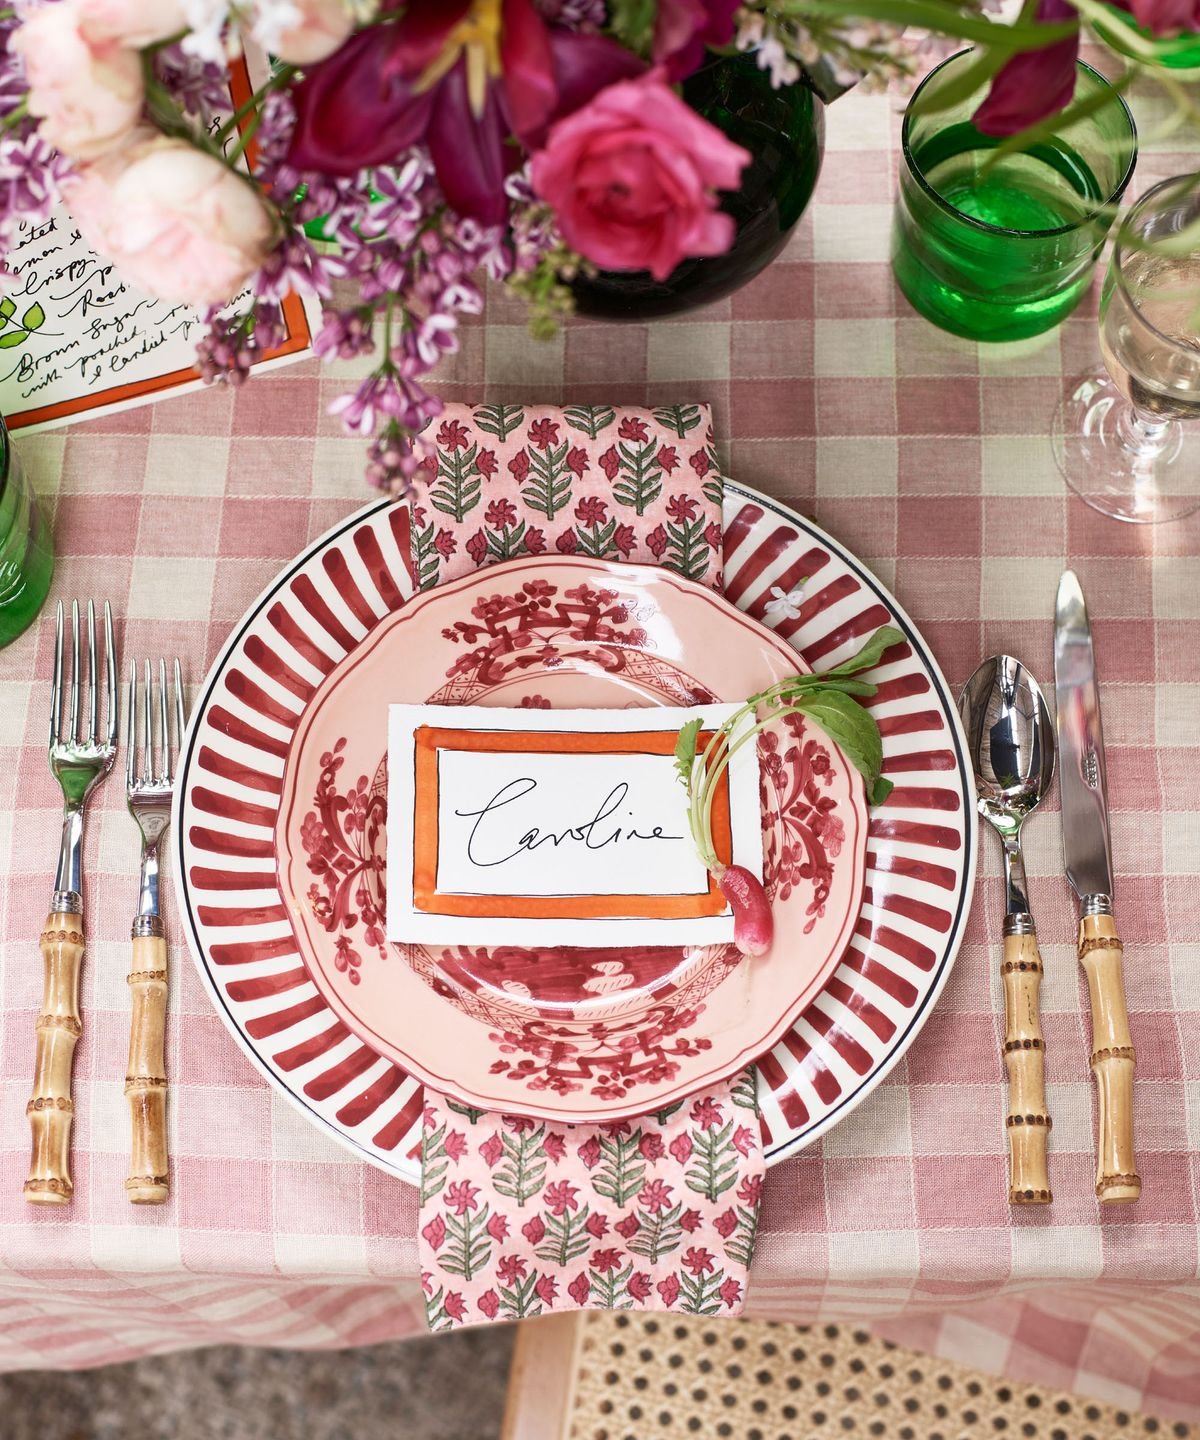 10 dining table styling tricks to steal from top stylists – to make yours dinner party-ready